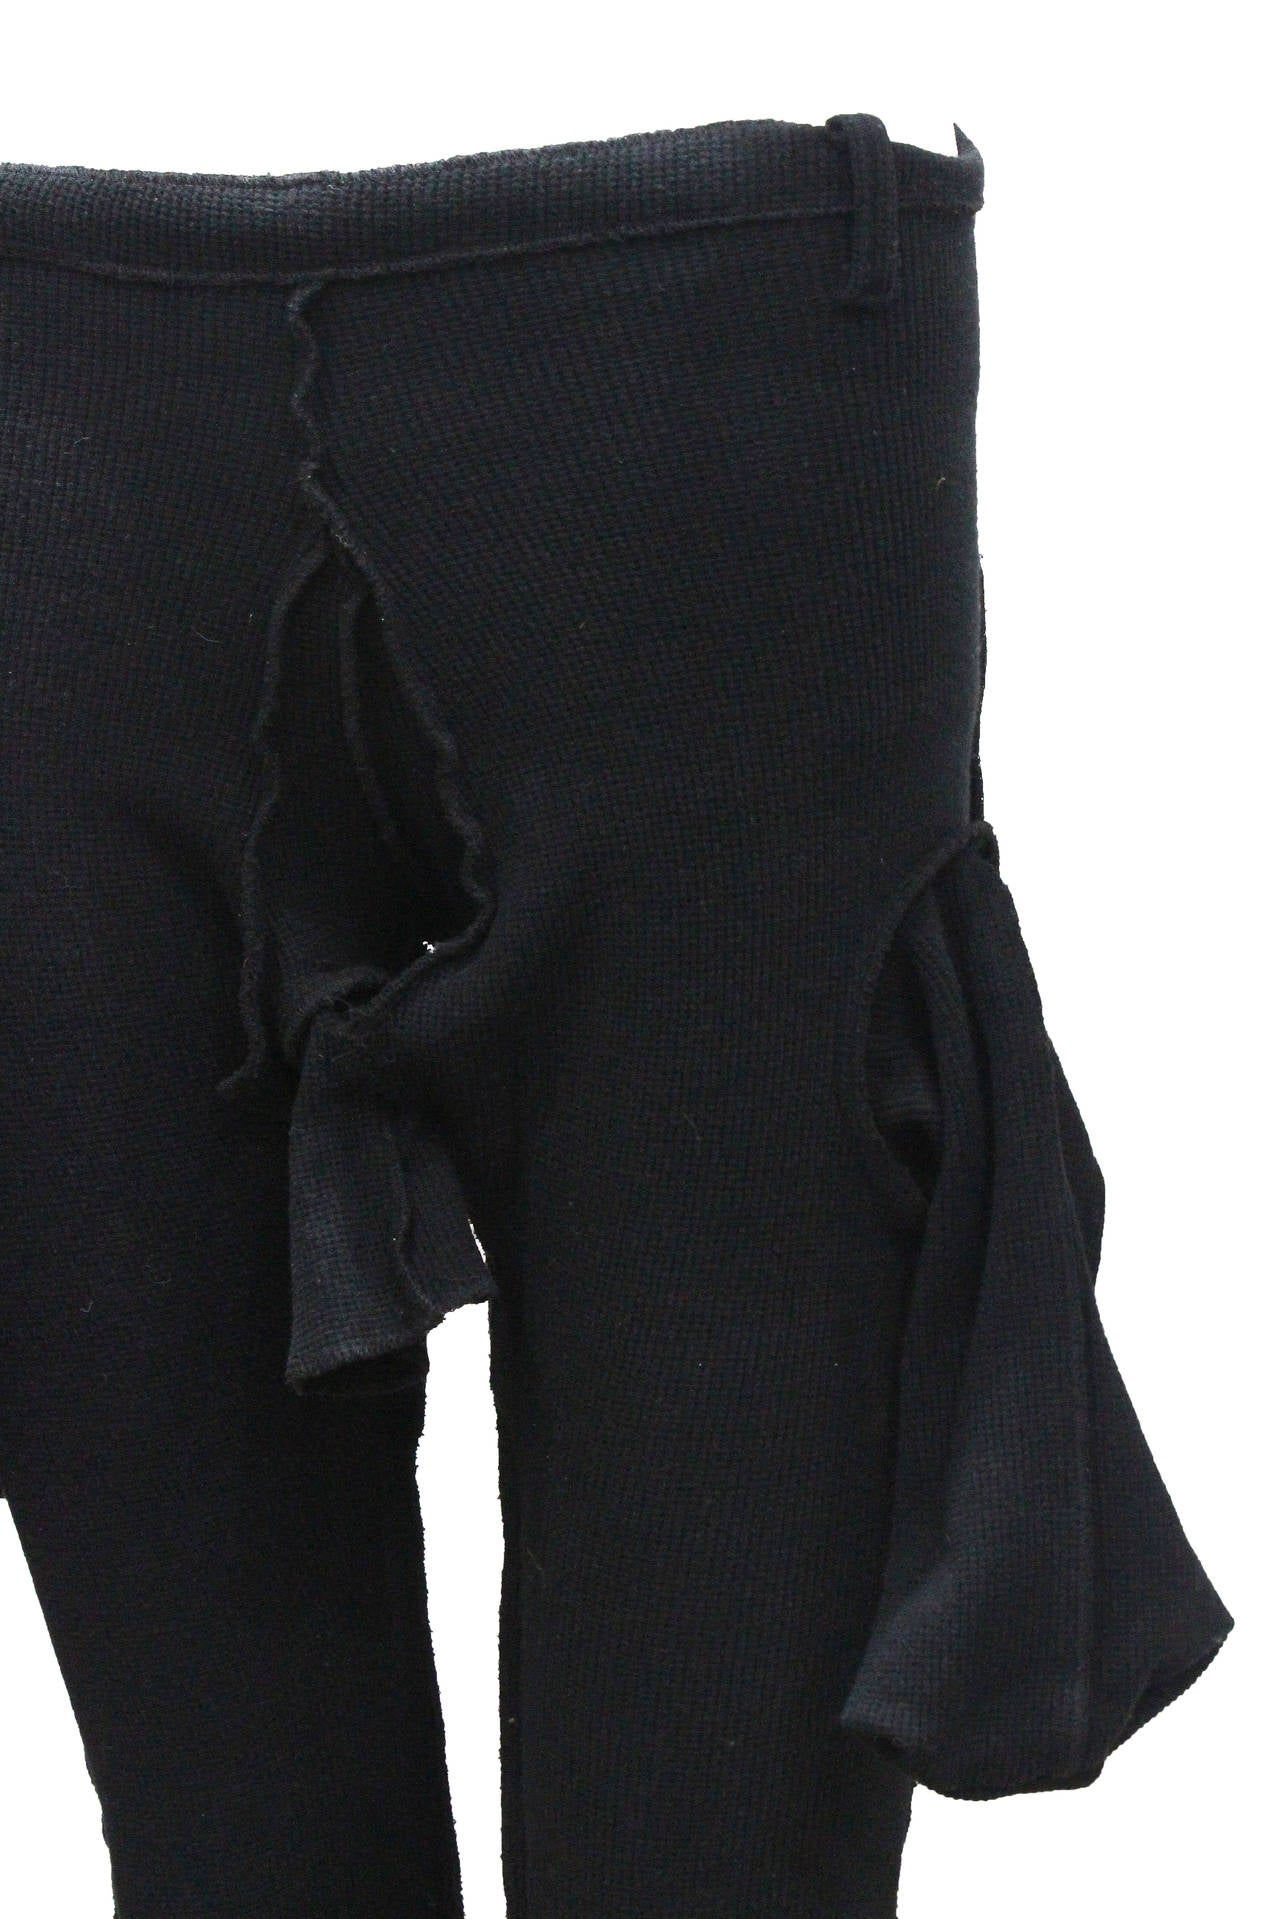 A fine and rare knitted pair of penis pants by artist and designer Christopher Nemeth. The pants are designed with a deconstructed aesthetic with frayed and raw edges, pockets turned inside out hang loosely all the way round and one acting as an